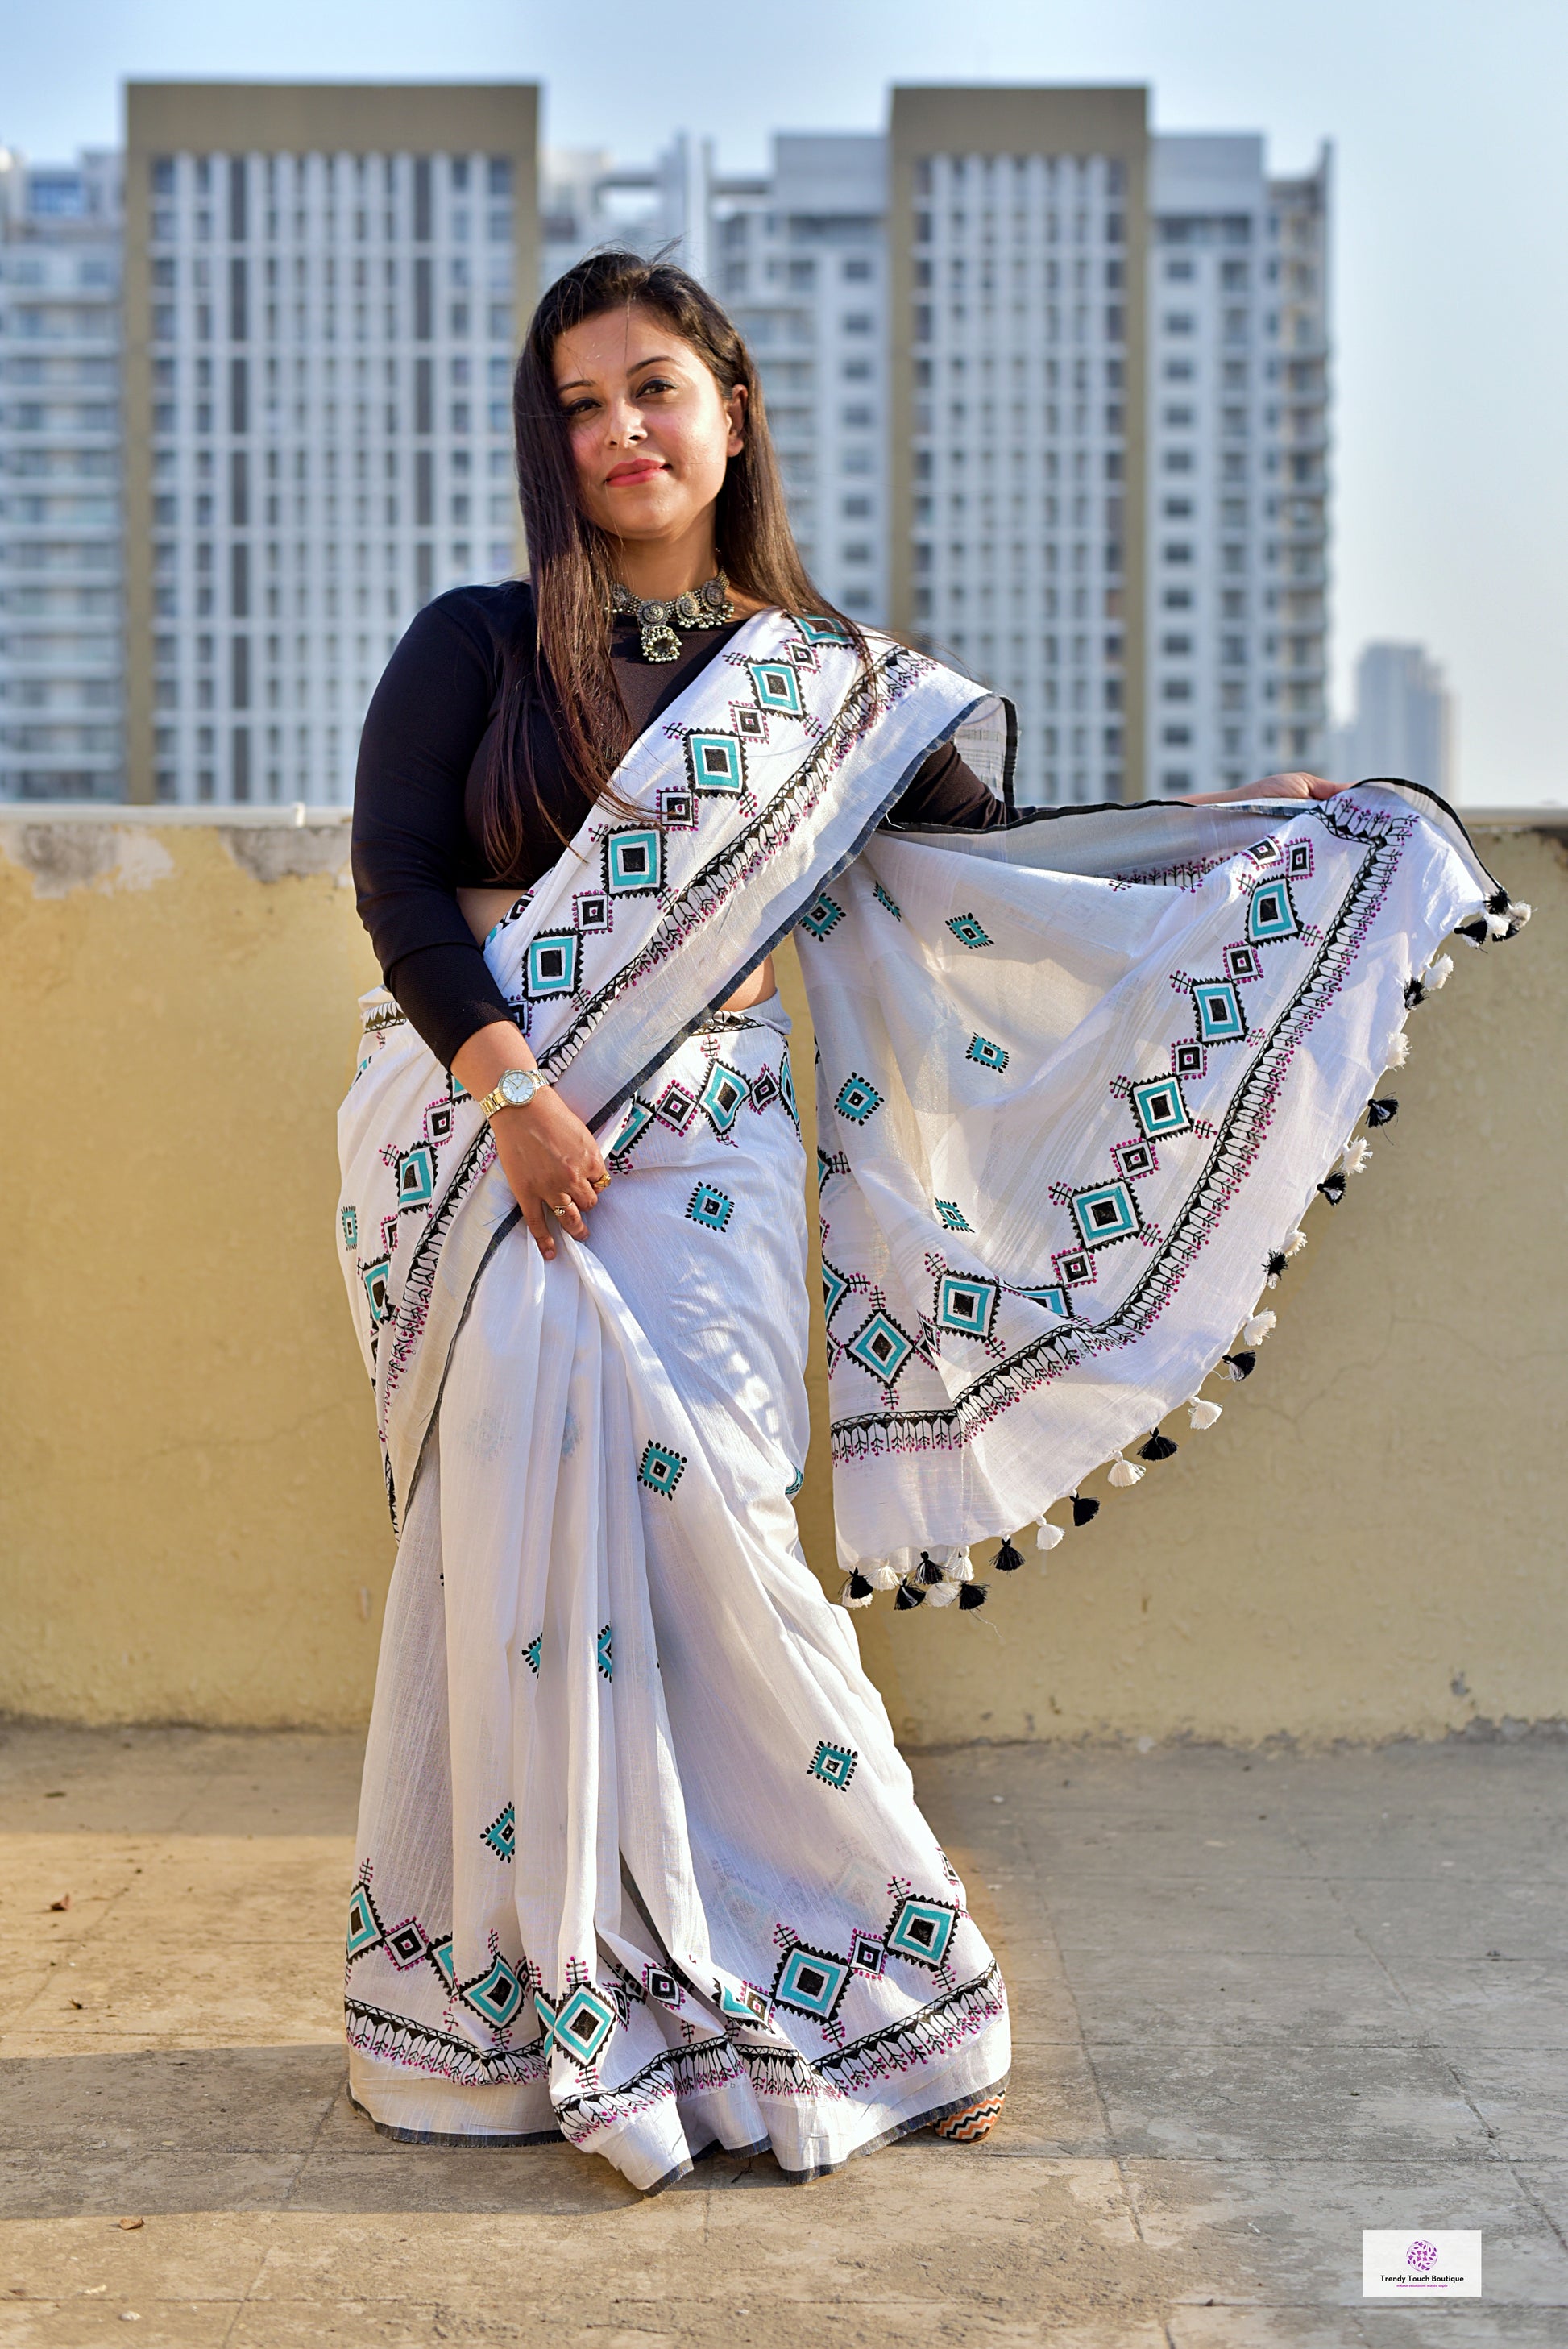 Handpainted designer soft linen saree in white black blue for special celebration and wedding parties in summer and all year round best price 